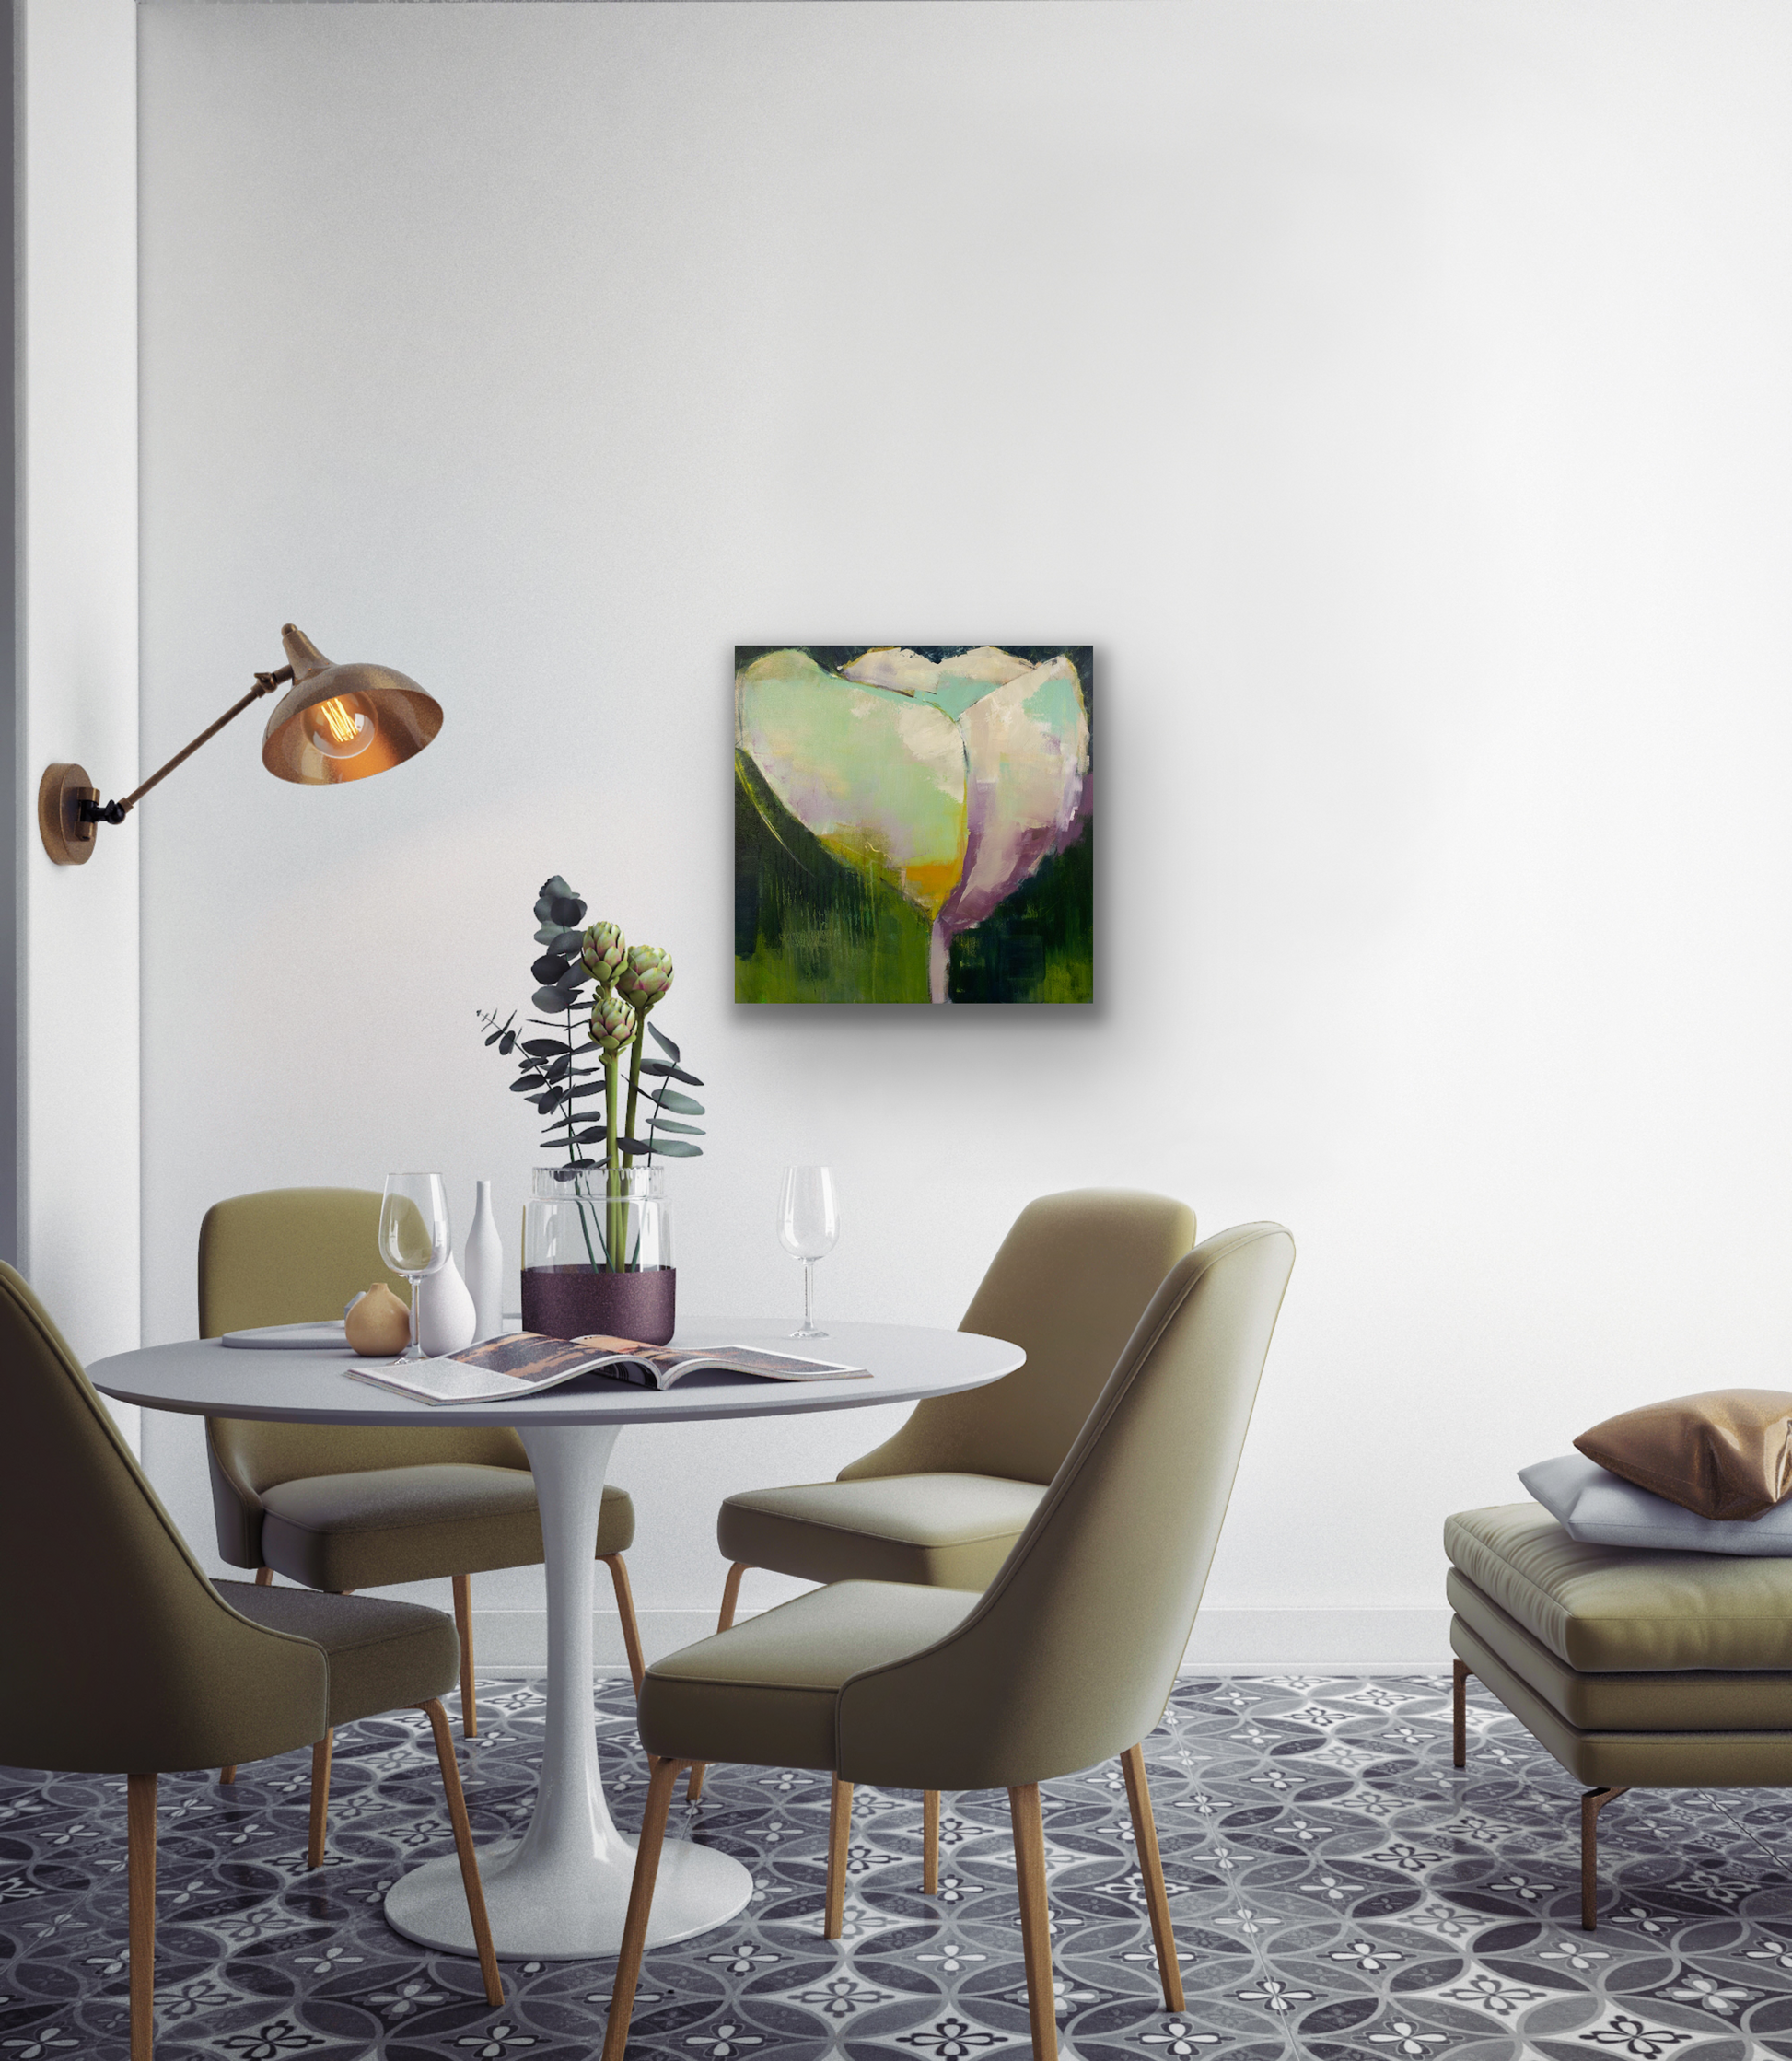 Heart's Desire 2 is an abstract giclee canvas print that comes in four different sizes to fit your wall perfectly.